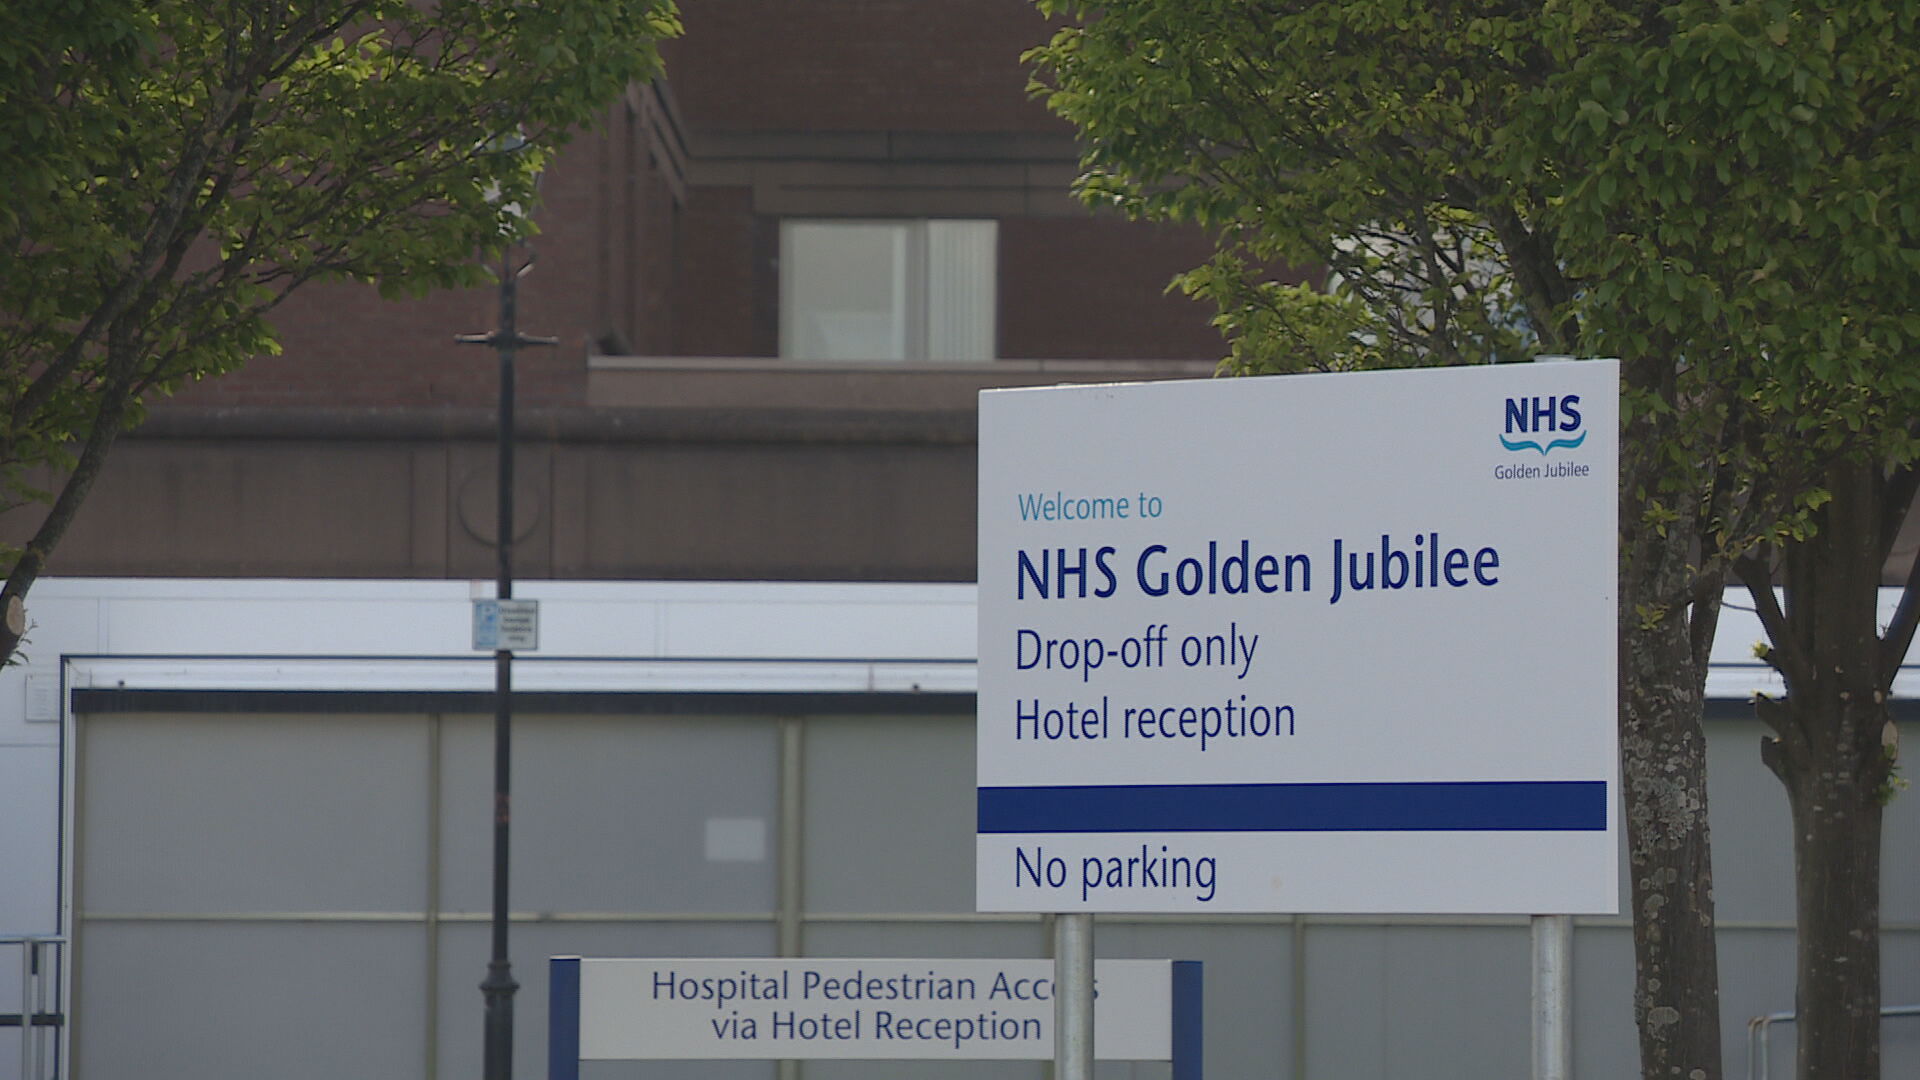 NHS Golden Jubilee Hospital is celebrating its 20th anniversary. 